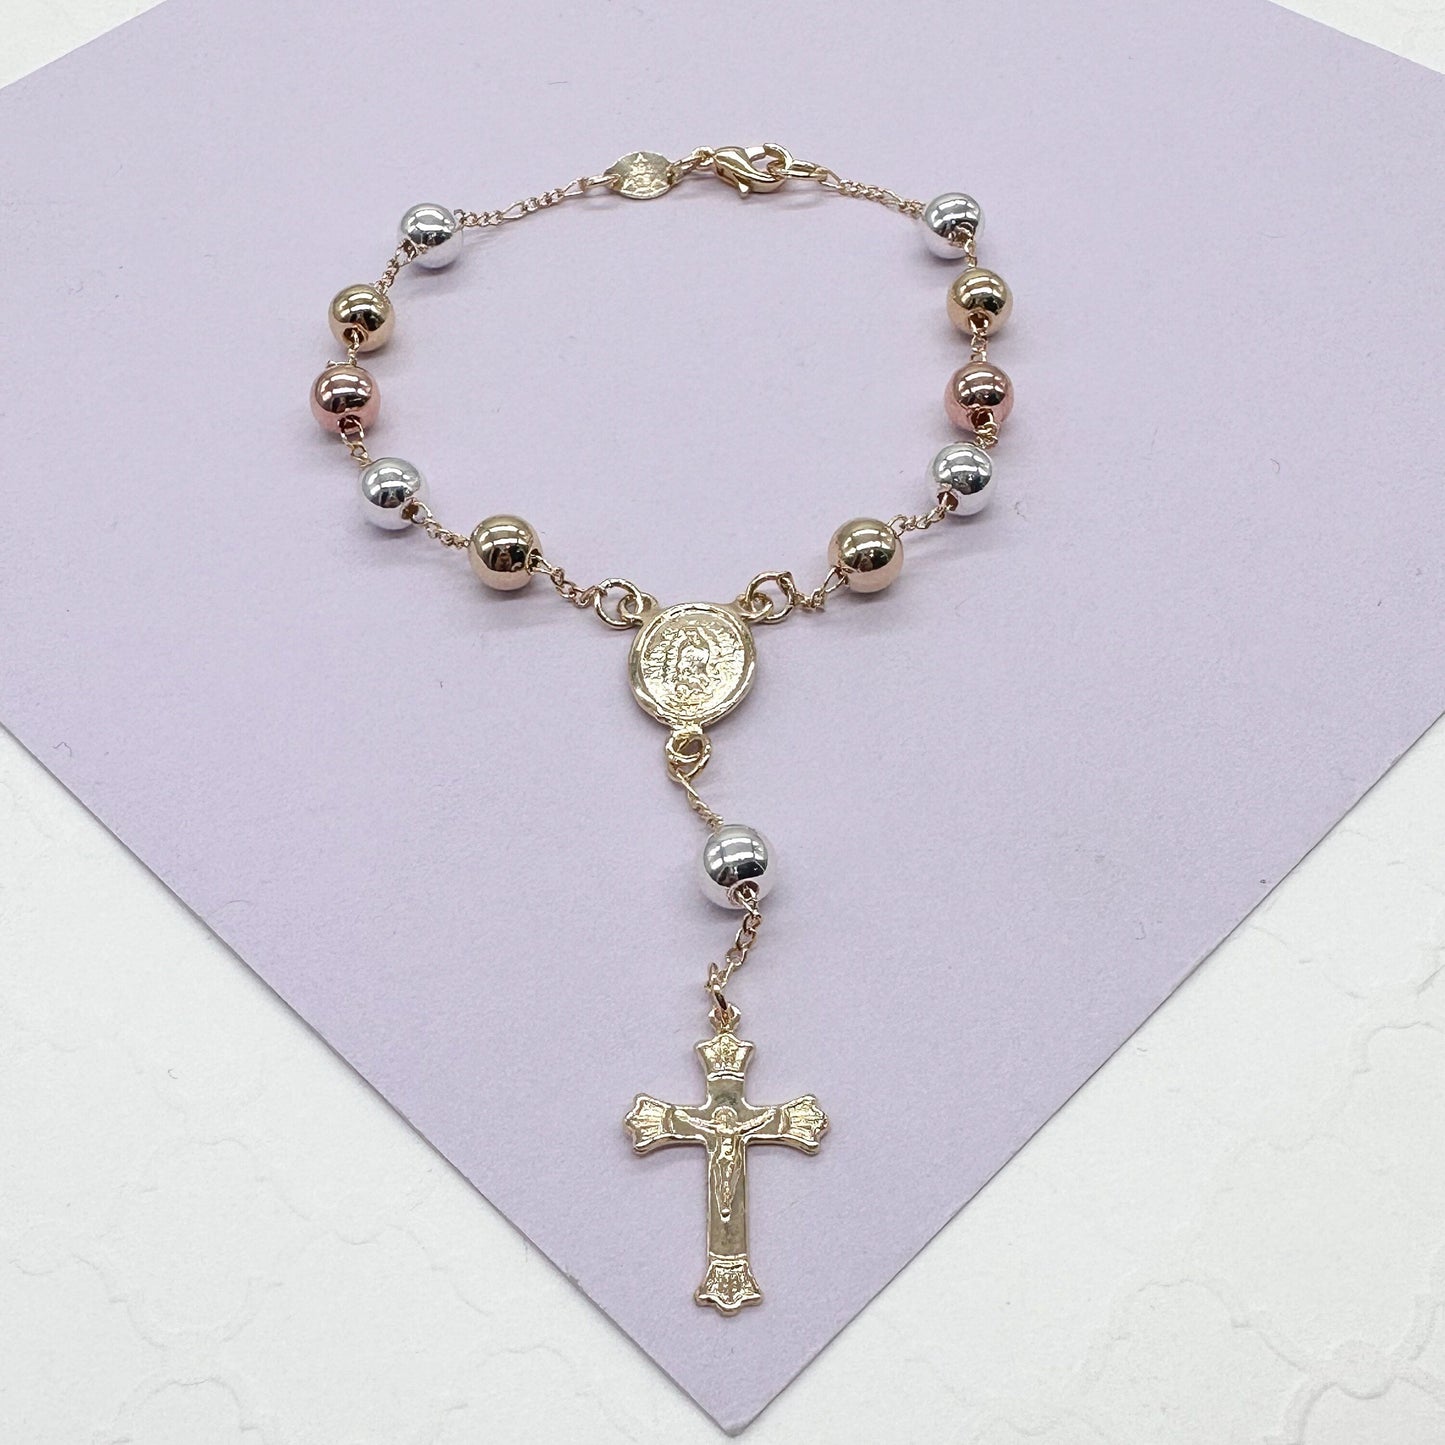 18k GoldFilled Tri-Colored Rosary Bracelet With Virgin Mary Charm